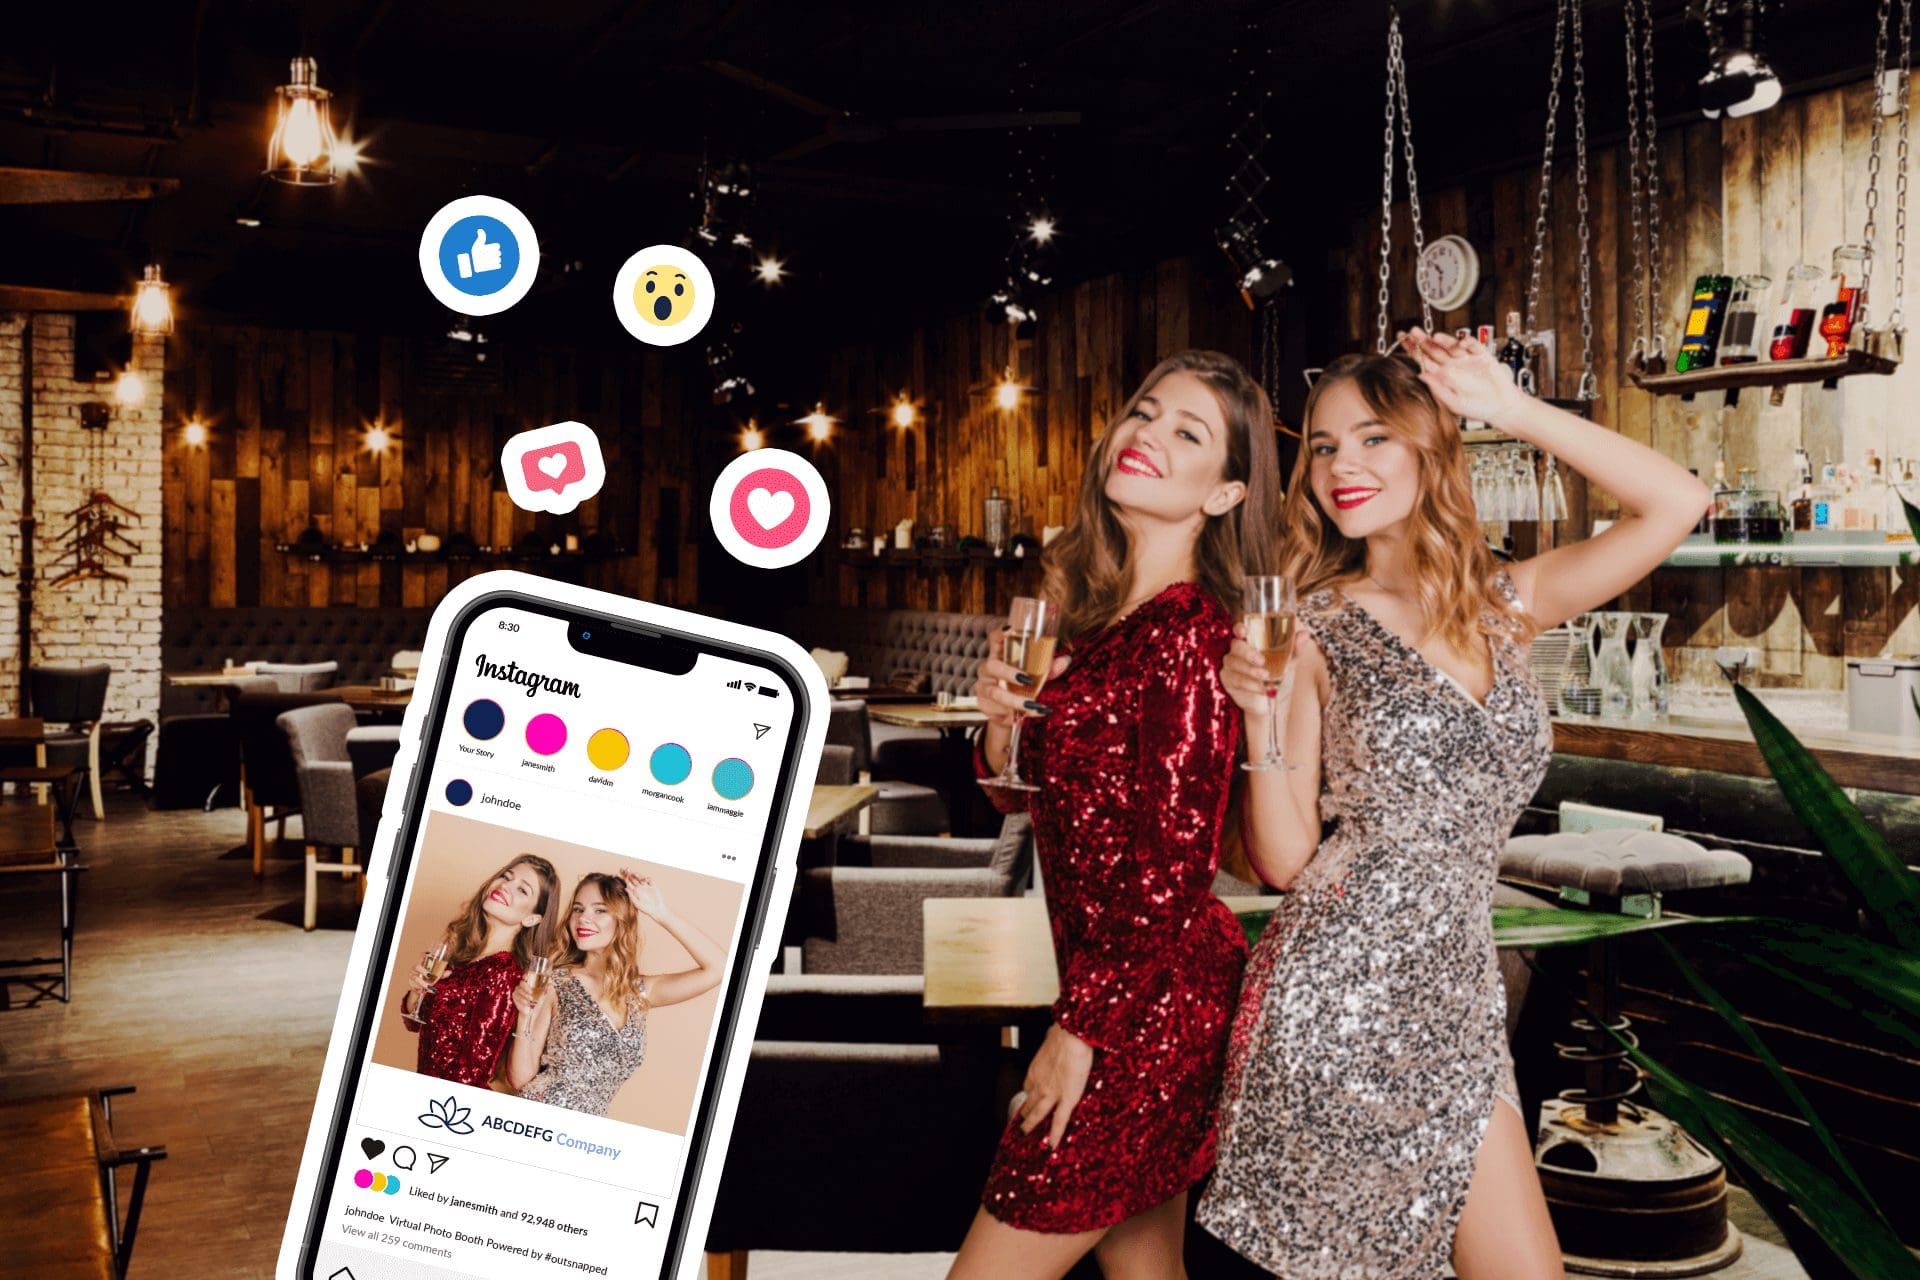 OutSnapped's proprietary AI-powered Event Photography cloud platform, guests instantly receive, enjoy & share photos from your events!